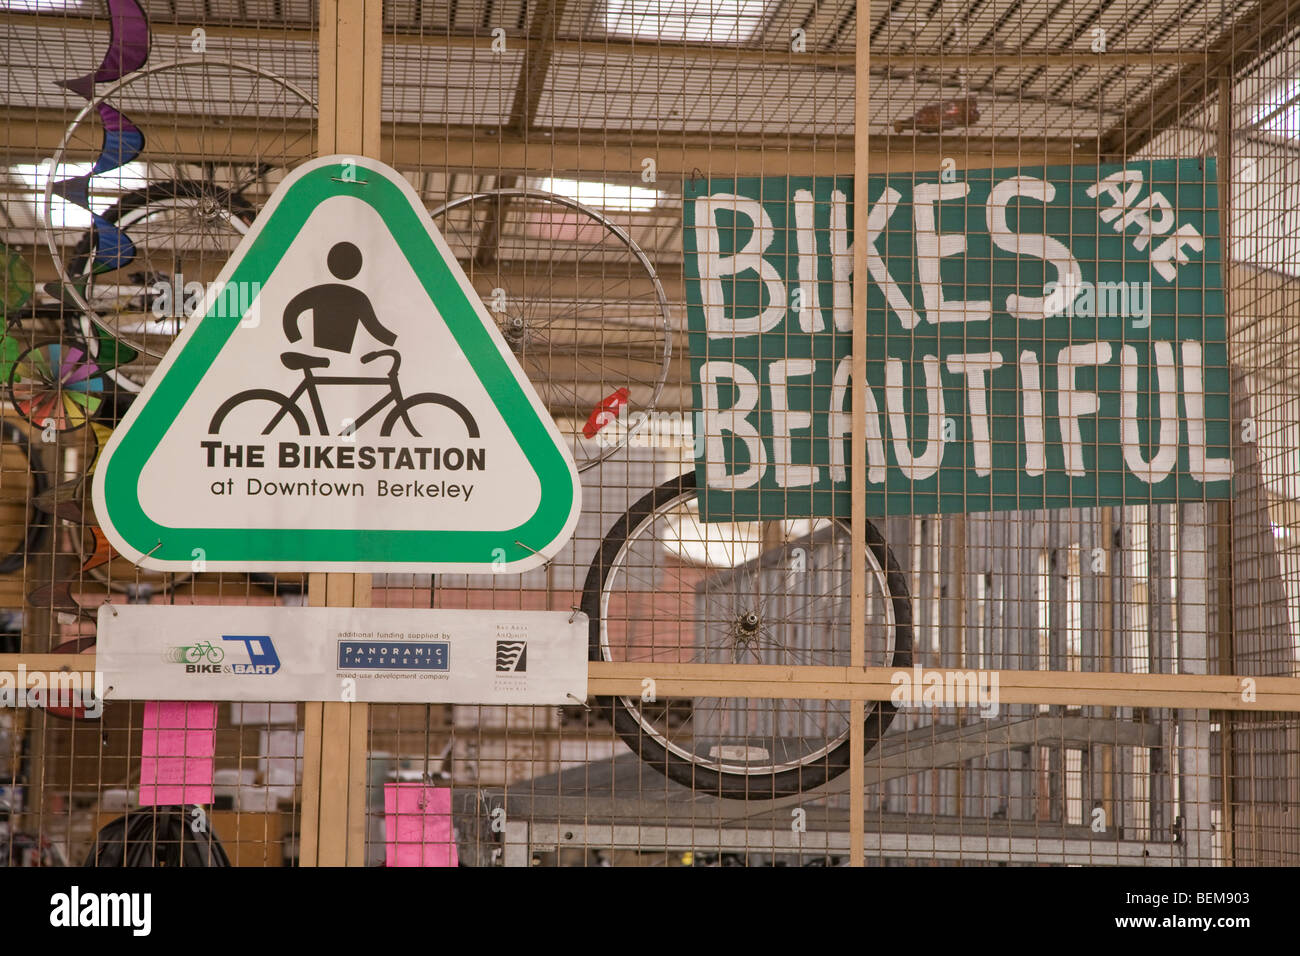 Bikes Are Beautiful and bikestation signs at a bicycle storage at the Downtown Berkeley BART station. Berkeley, California, USA Stock Photo